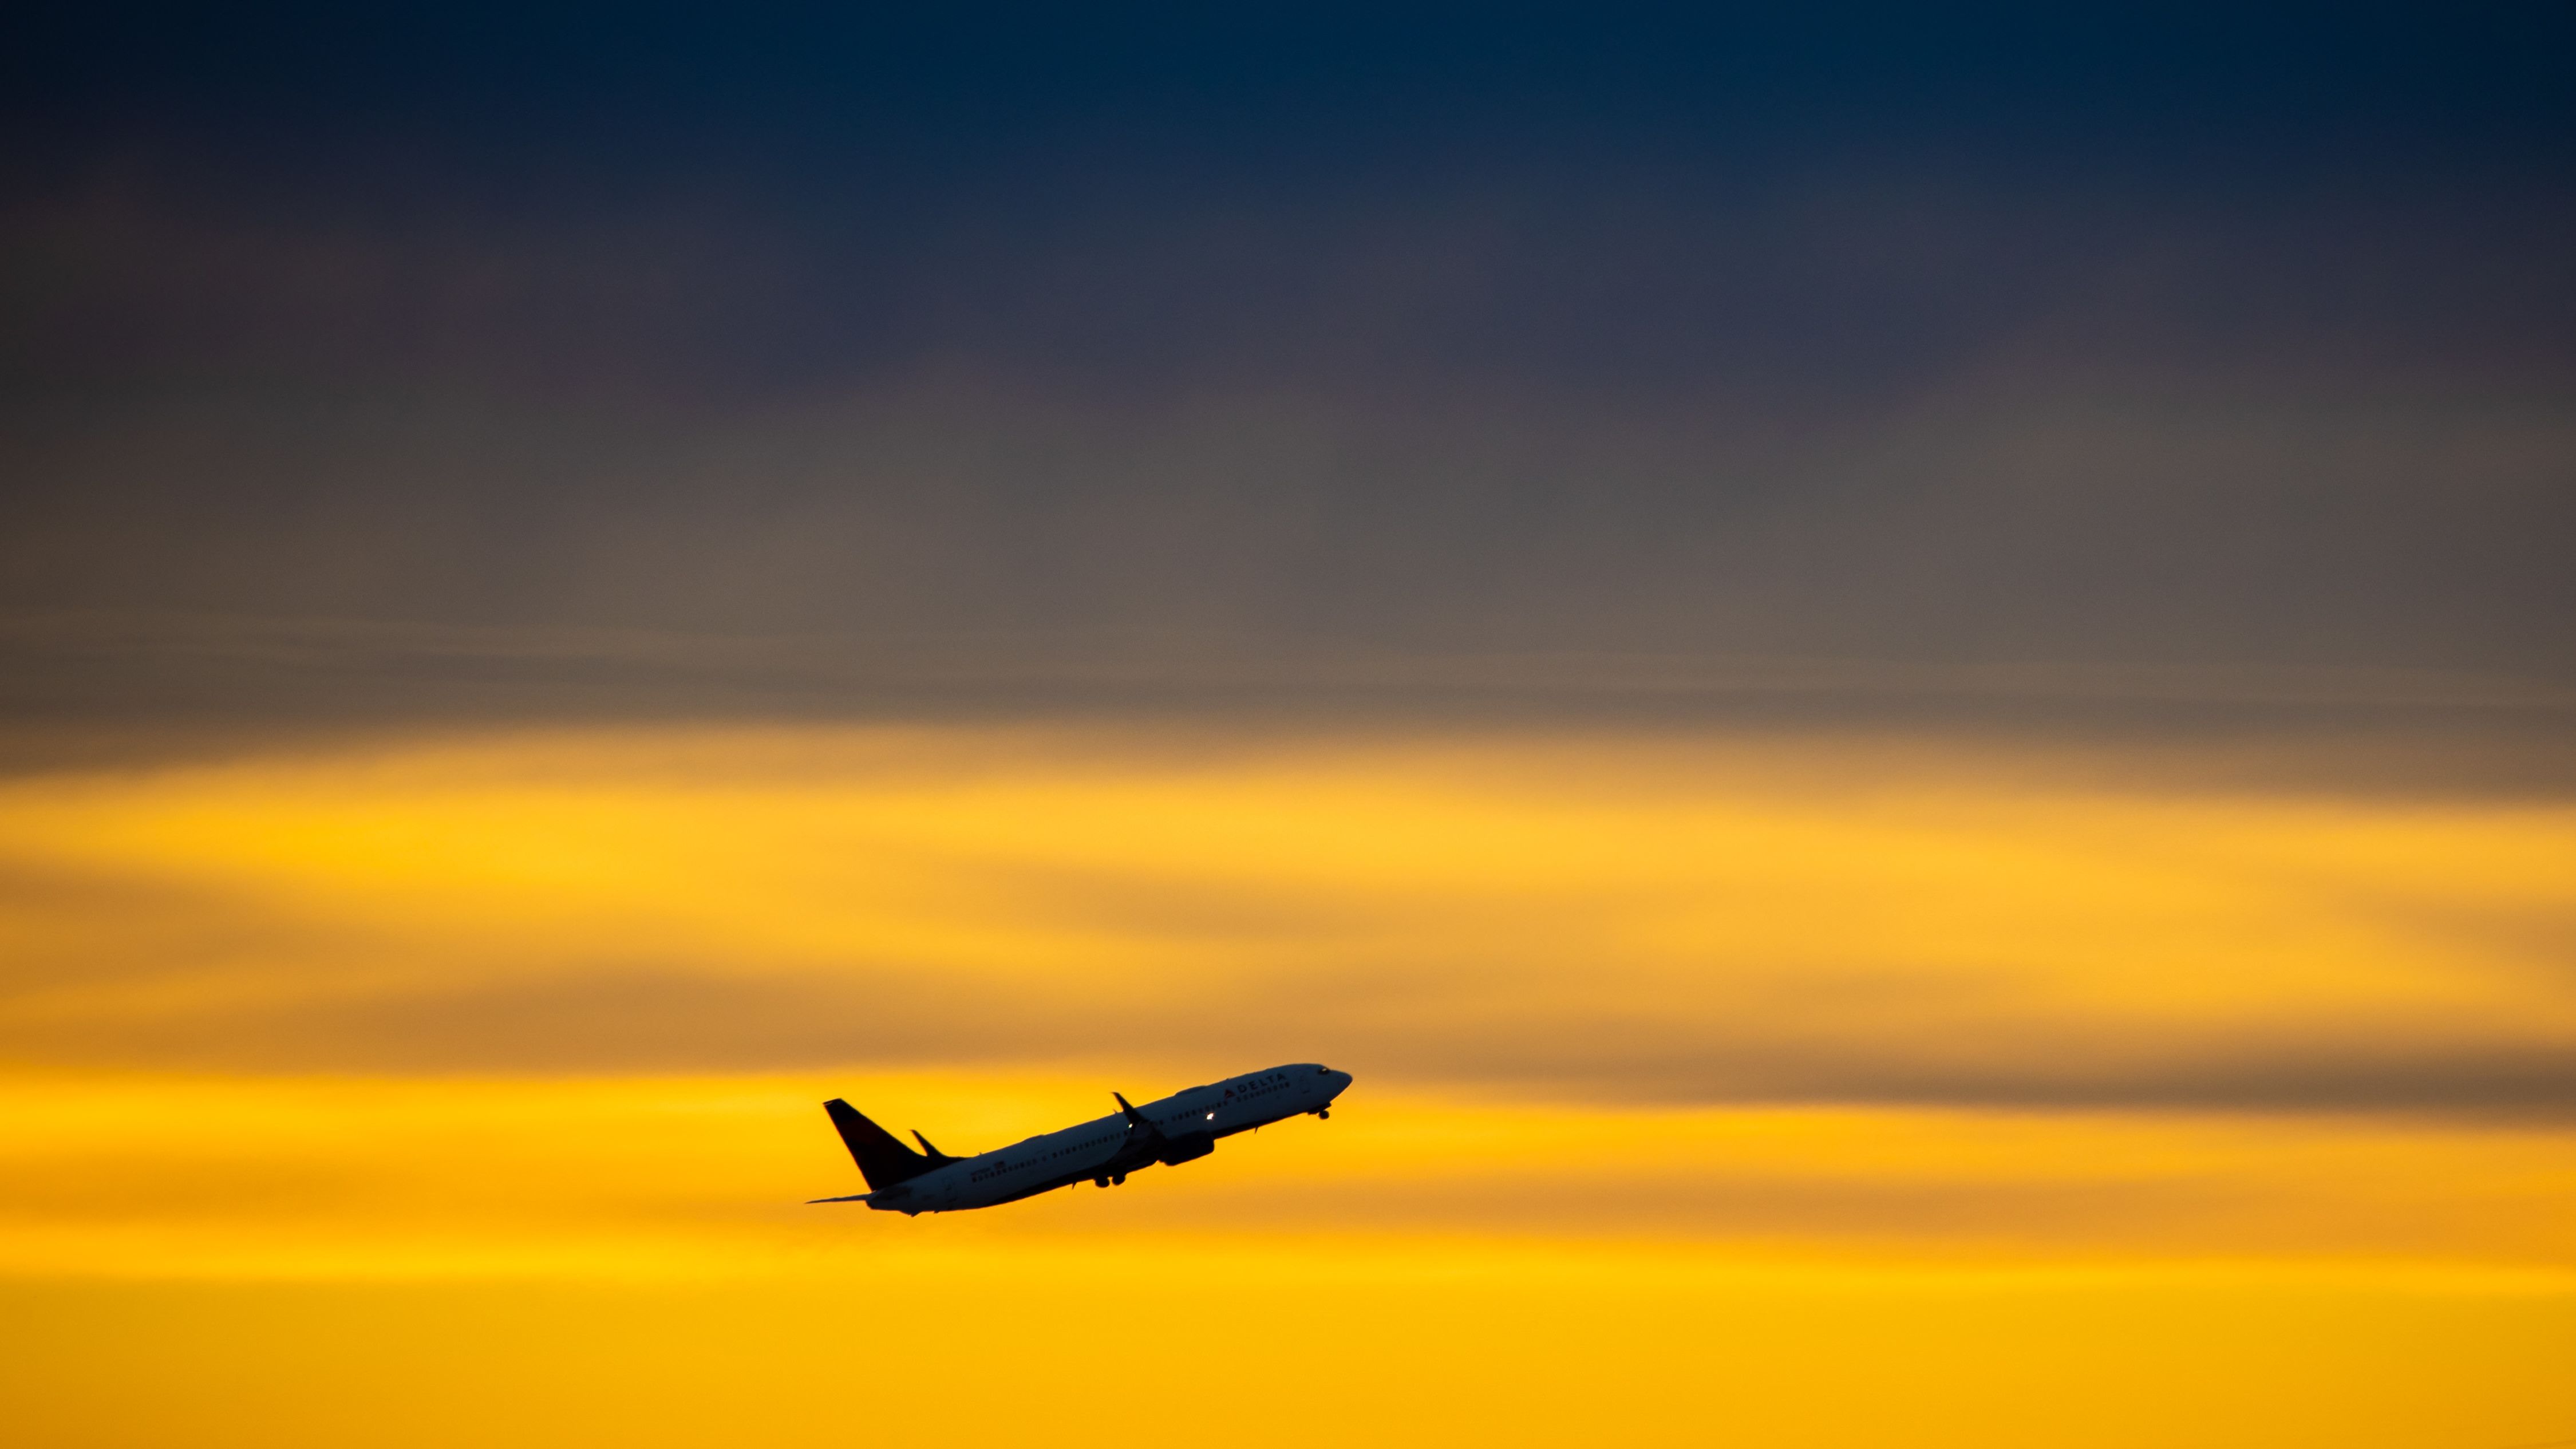 A Delta Air Lines plane against the sunrise in the sky.